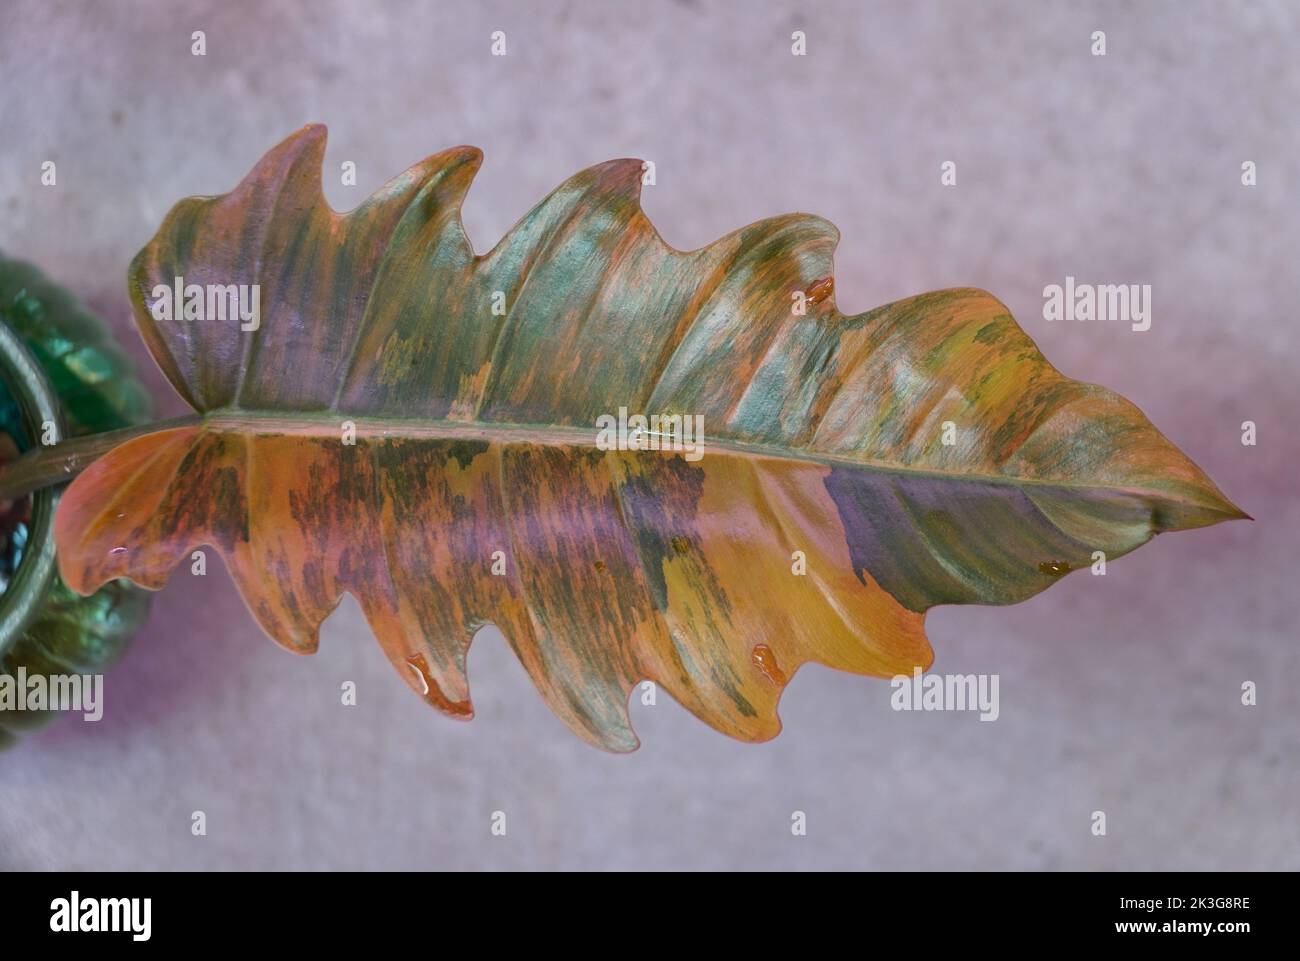 Stunning variegated and marbled leaf of Philodendron Caramel Marble, a rare tropical plant Stock Photo